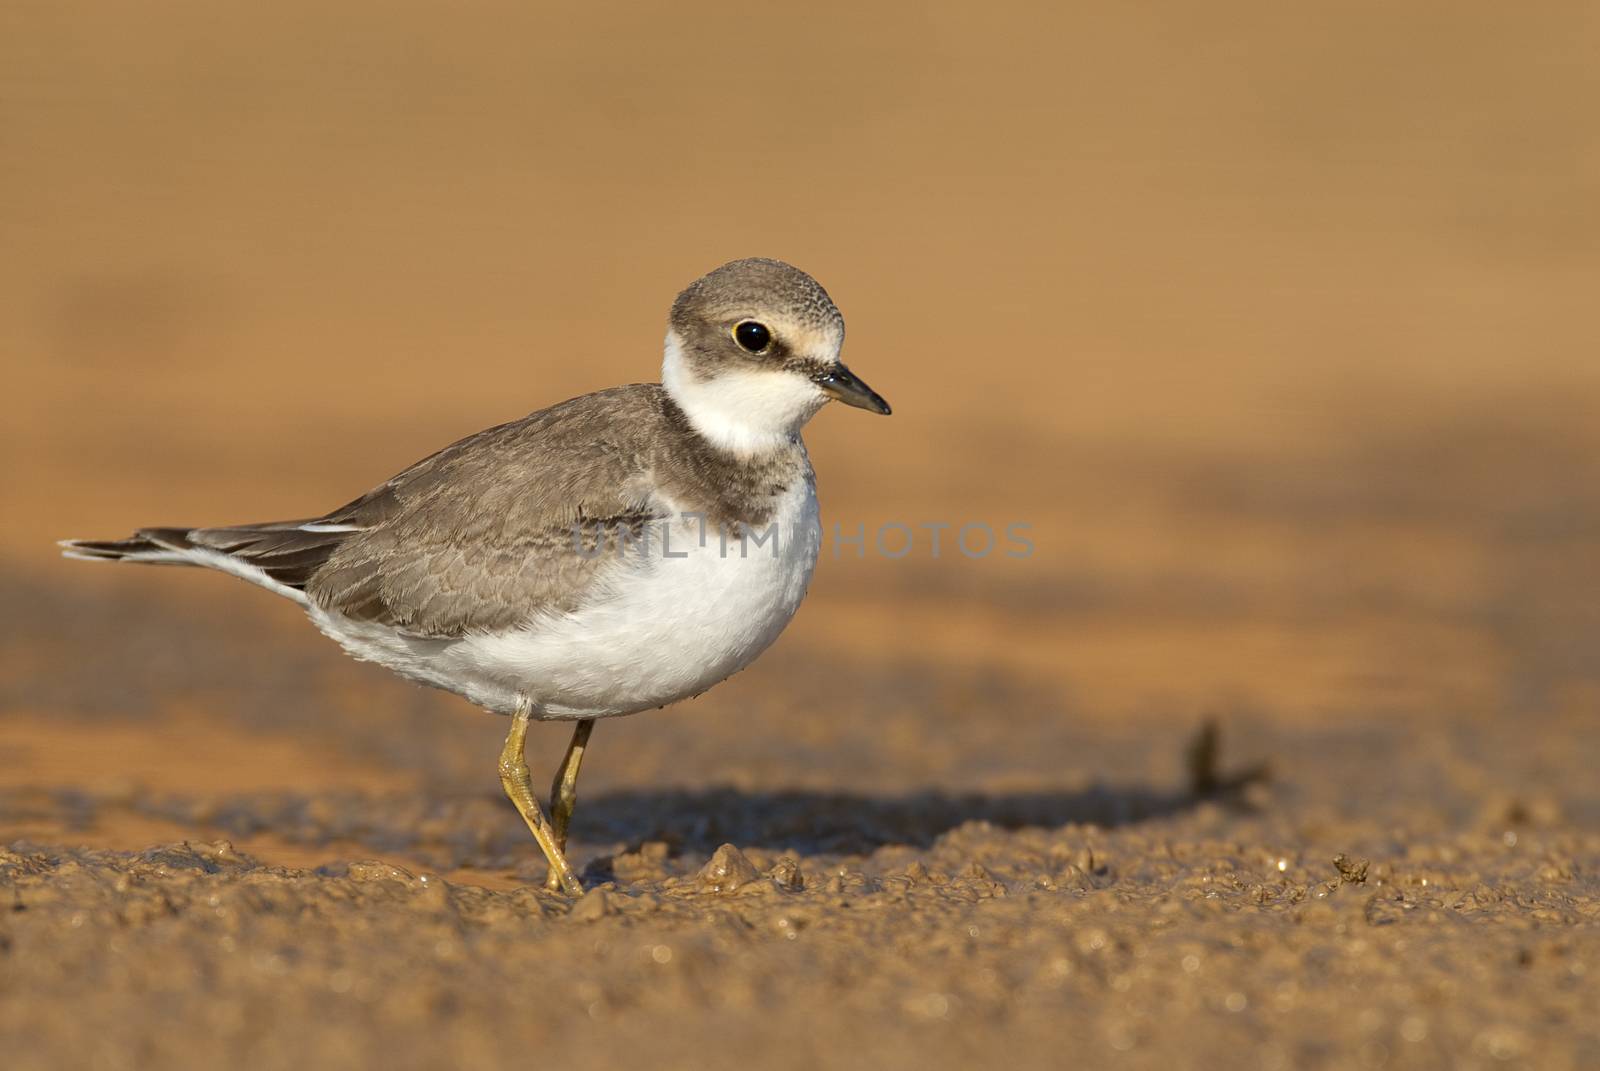 Little Ringed Plover (Charadrius dubius), Looking for food in wa by jalonsohu@gmail.com